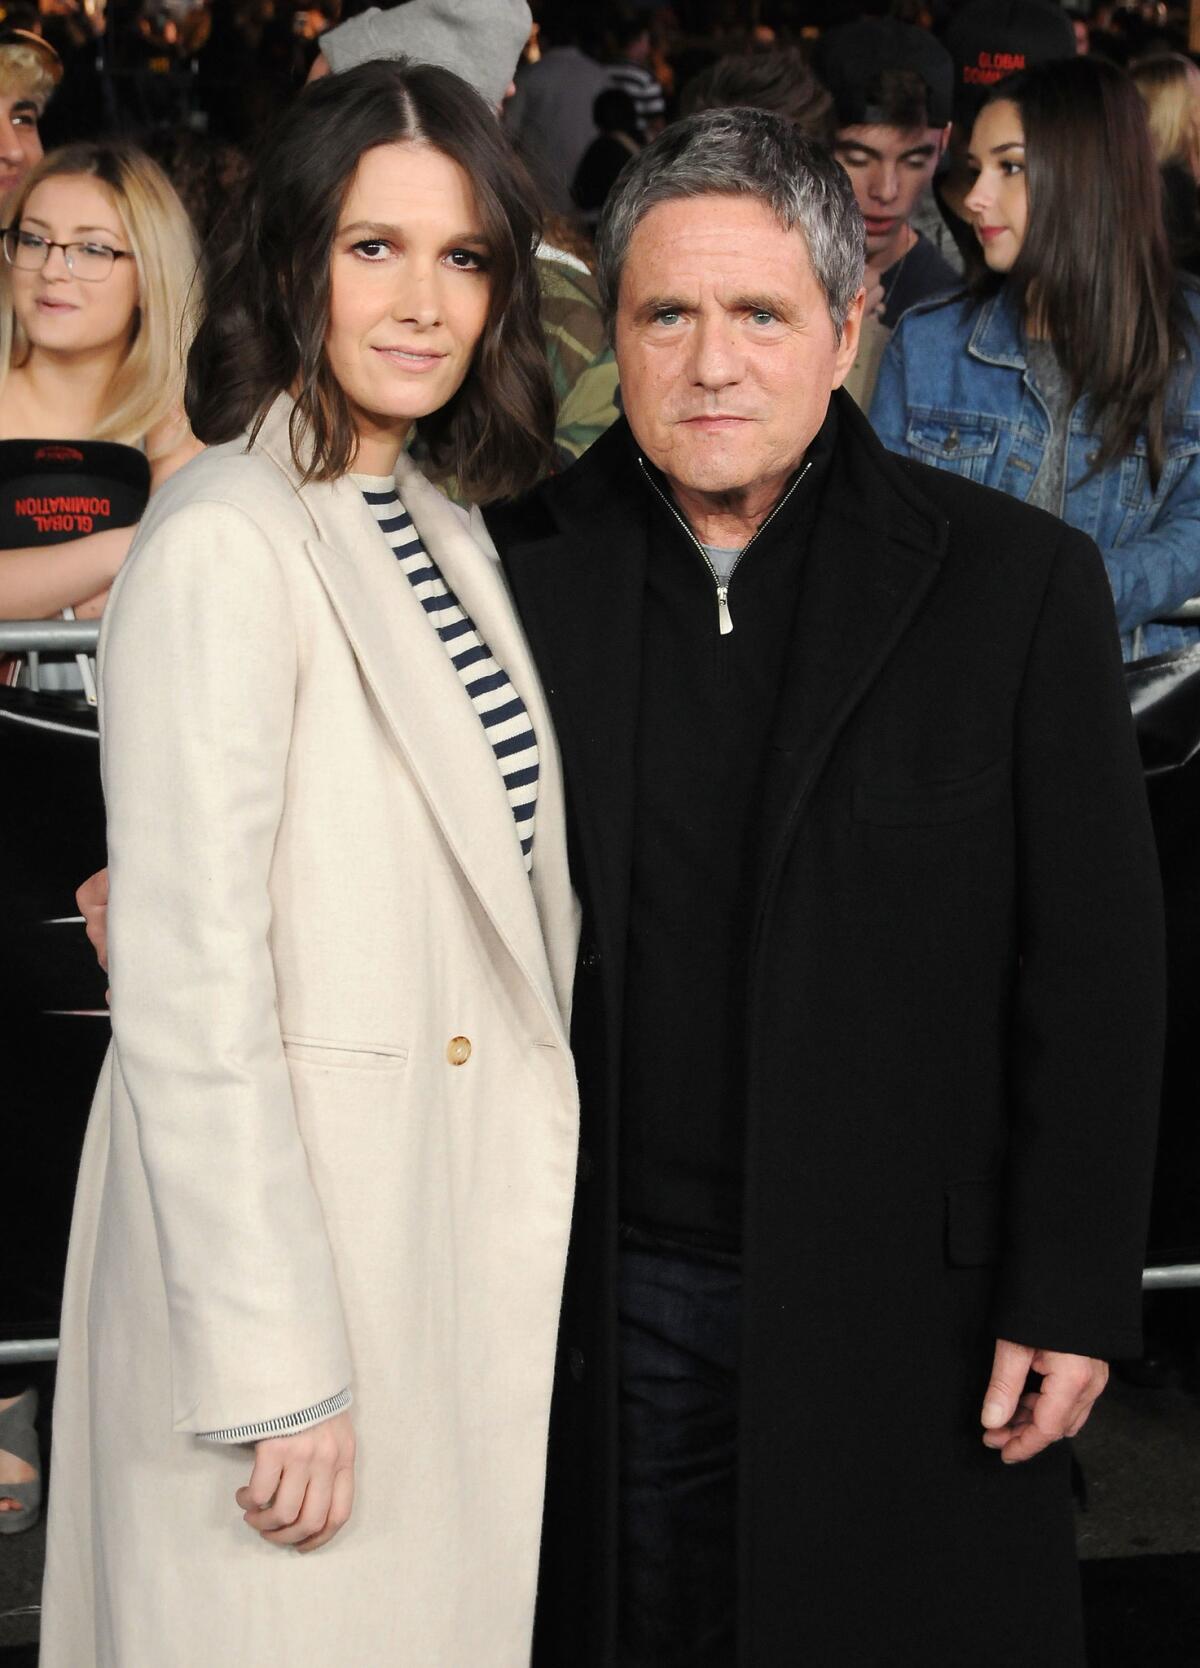 Grey with husband Brad Grey at a movie premiere in Hollywood in January 2017, a few months before he died.